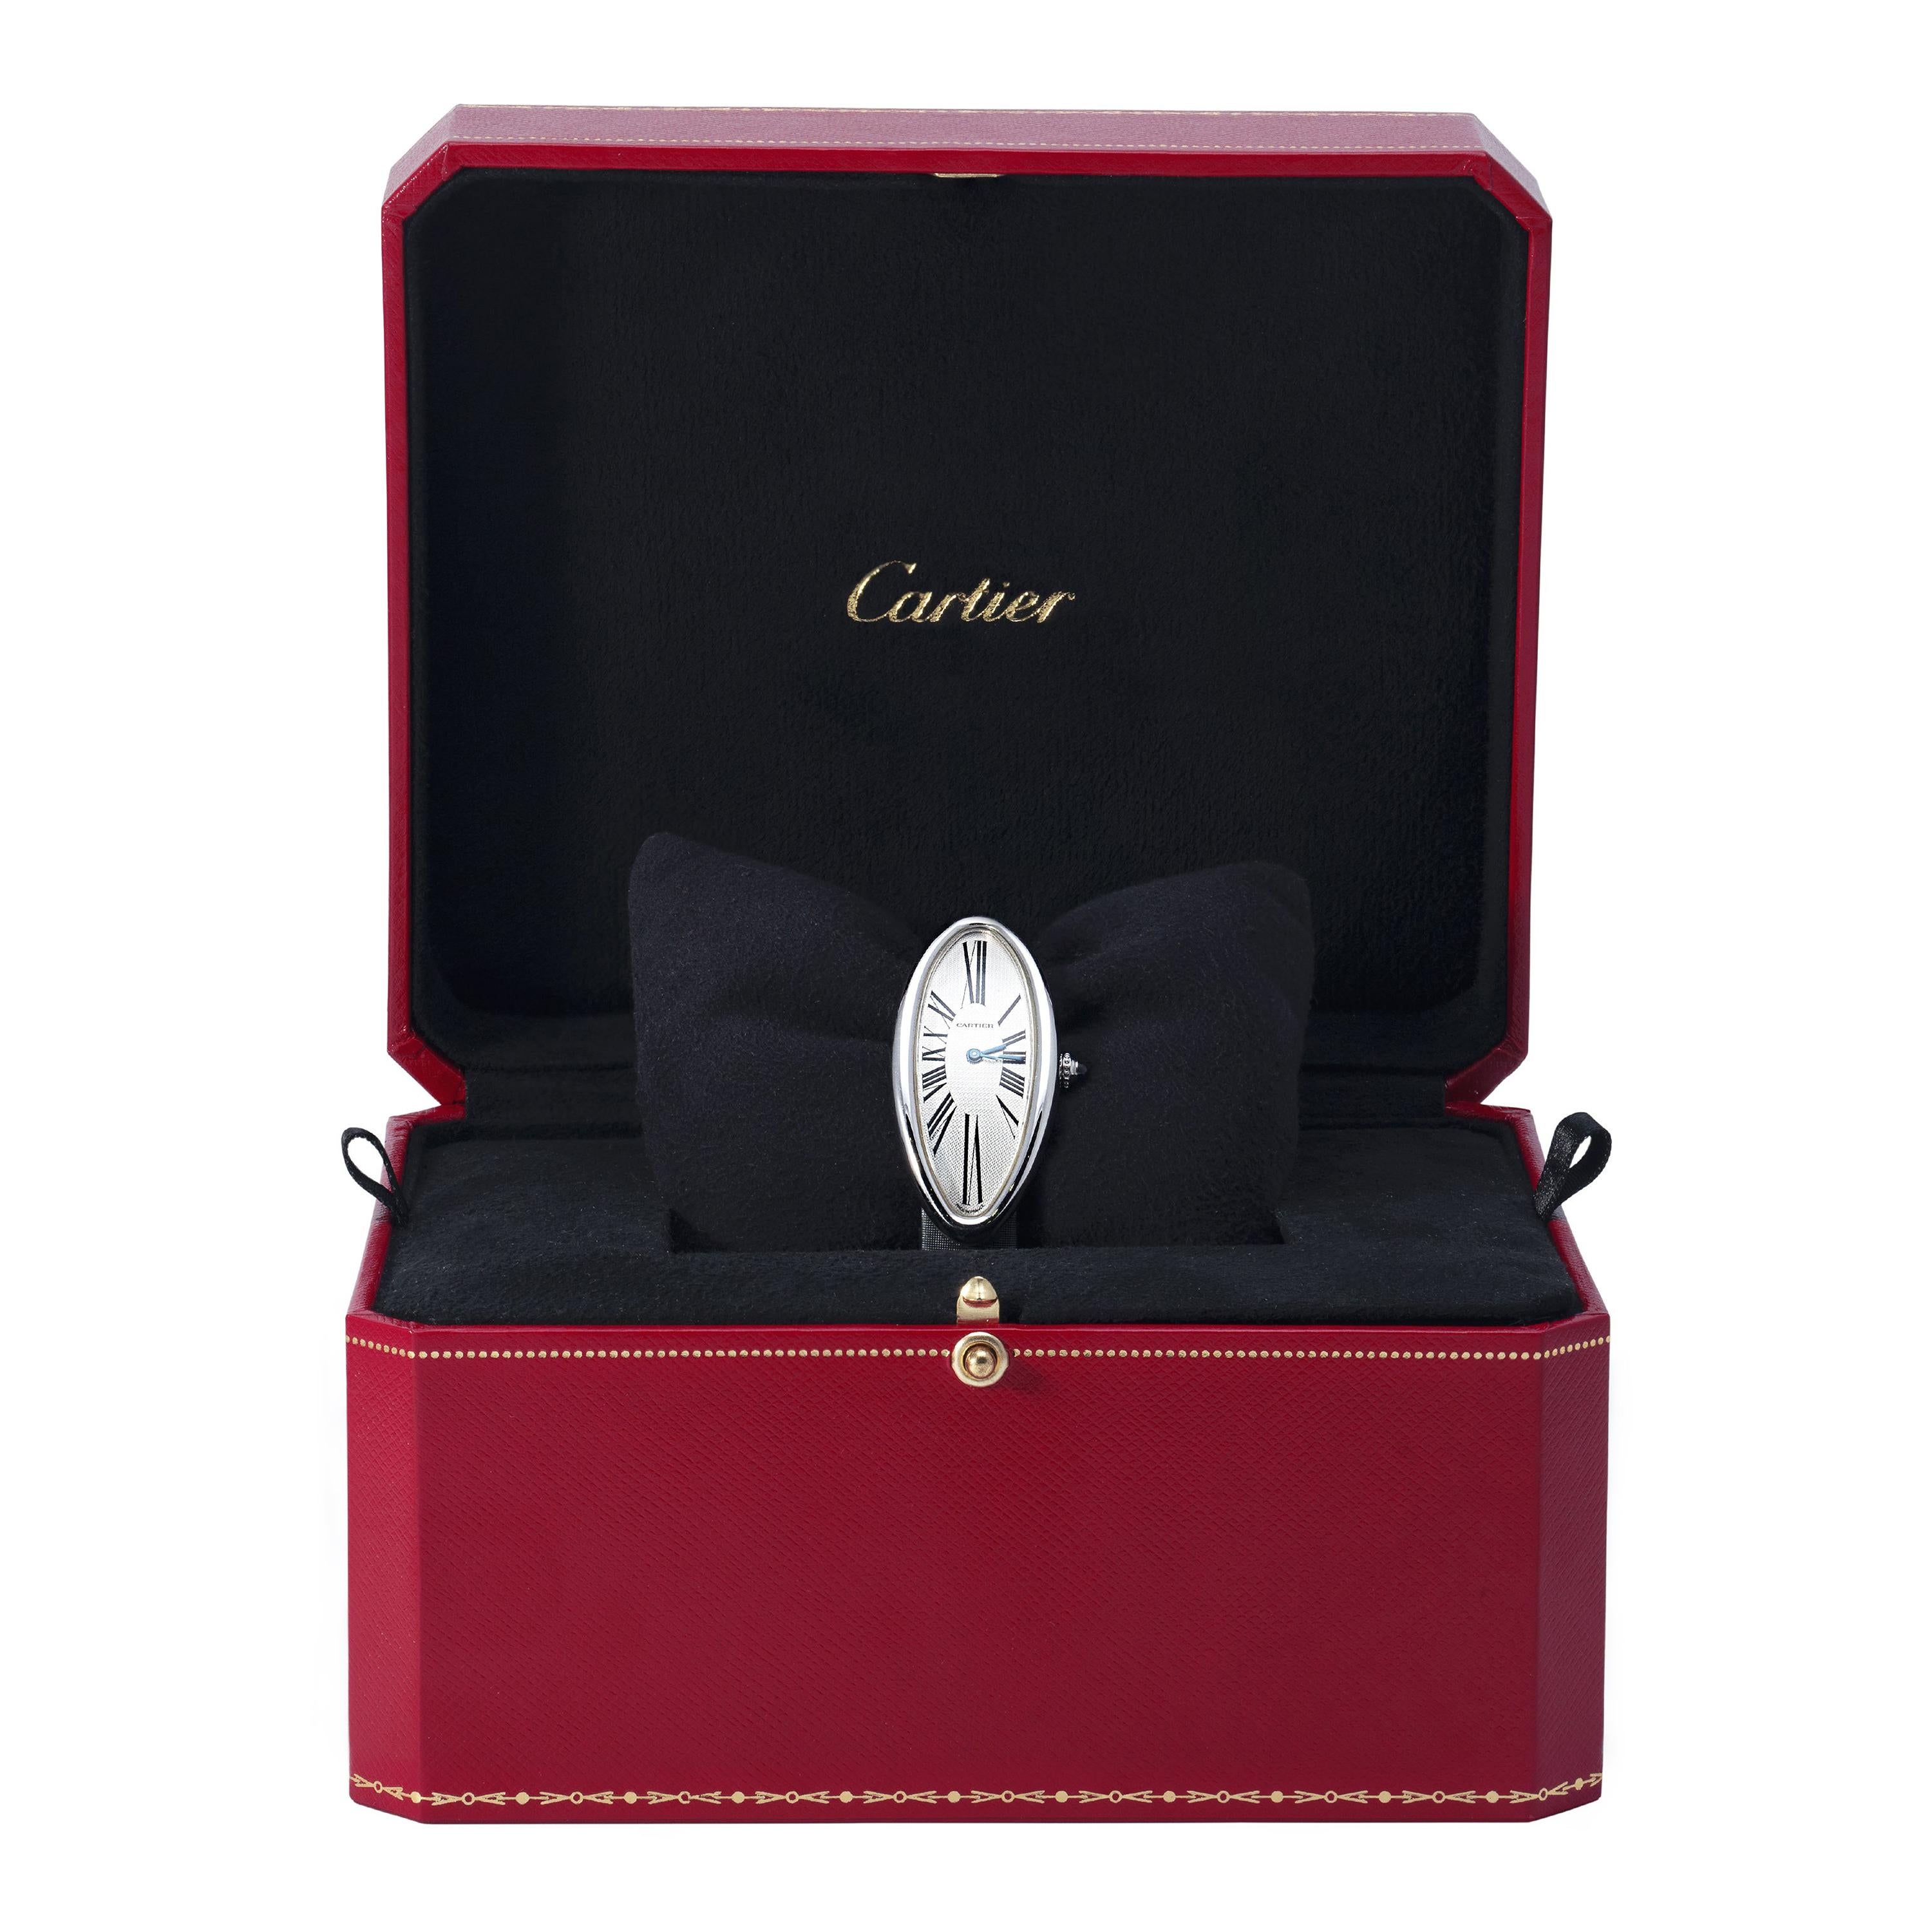 Cartier Watch model Baignoire allongée in white gold, Roman numbers, grey leather bracelet. 
N°125188AF Ref 2604. 
Cartier box. 
(40,85 grs)